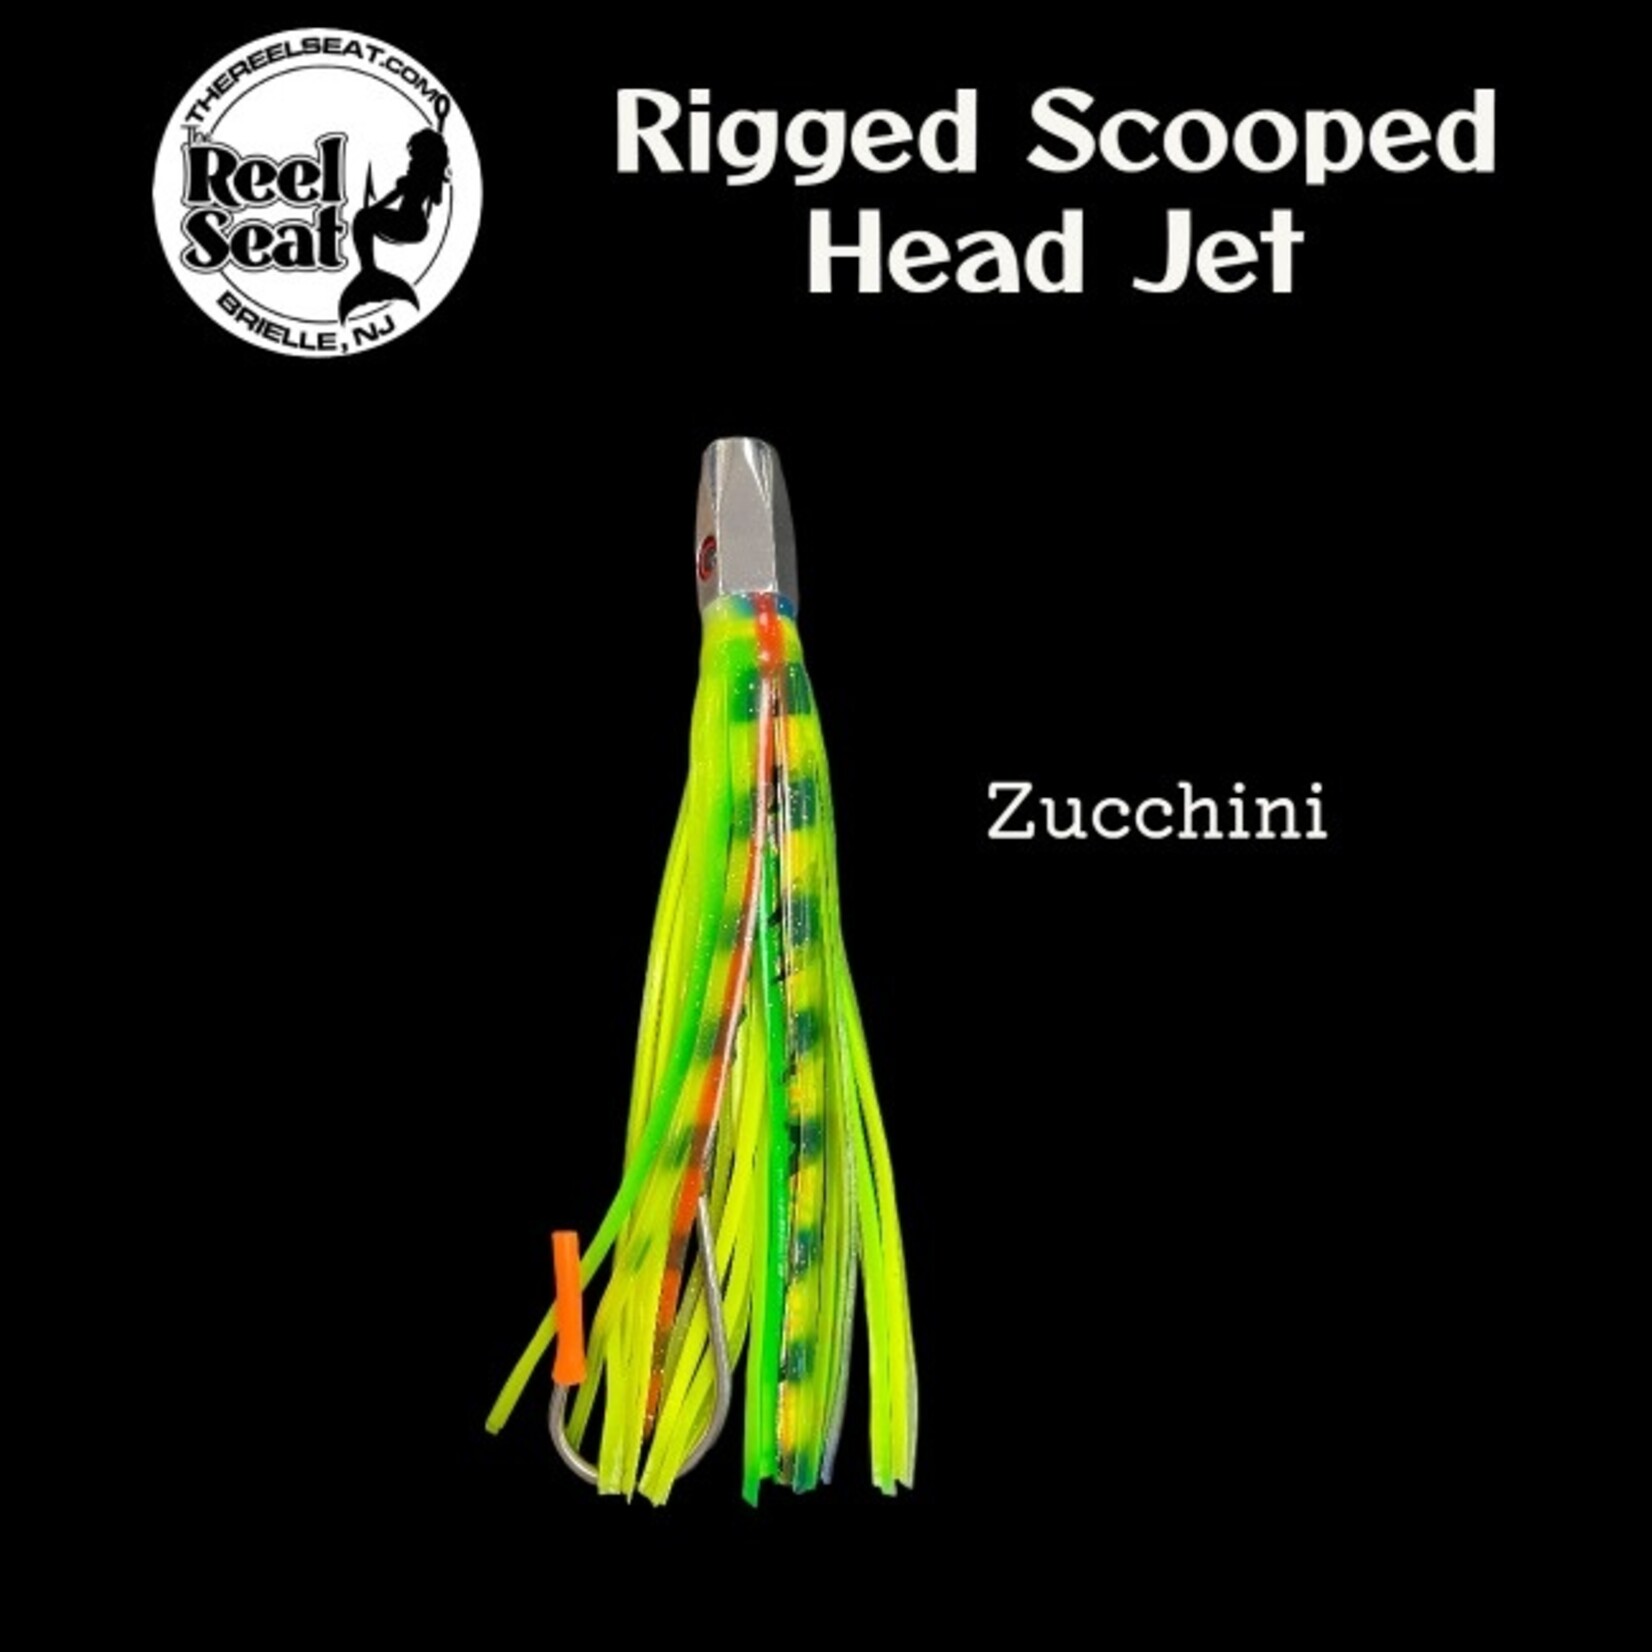 The Reel Seat RS Rigged Scooped Head Jet